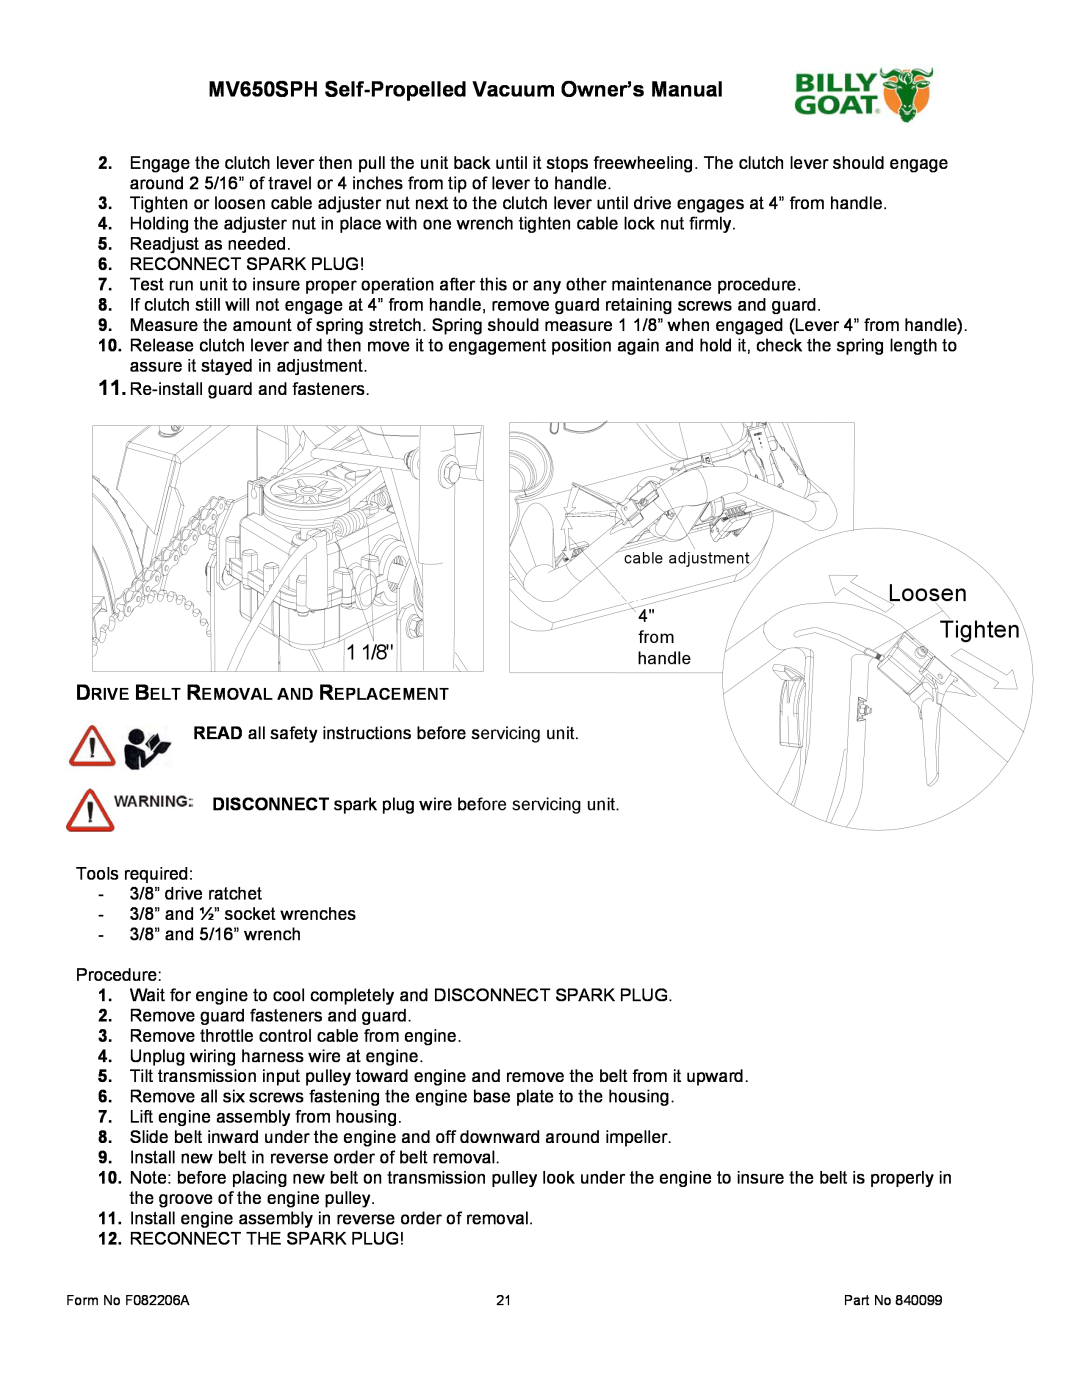 Billy Goat Loosen, Tighten, MV650SPH Self-Propelled Vacuum Owner’s Manual, 2 1/16”, Drive Belt Removal And Replacement 